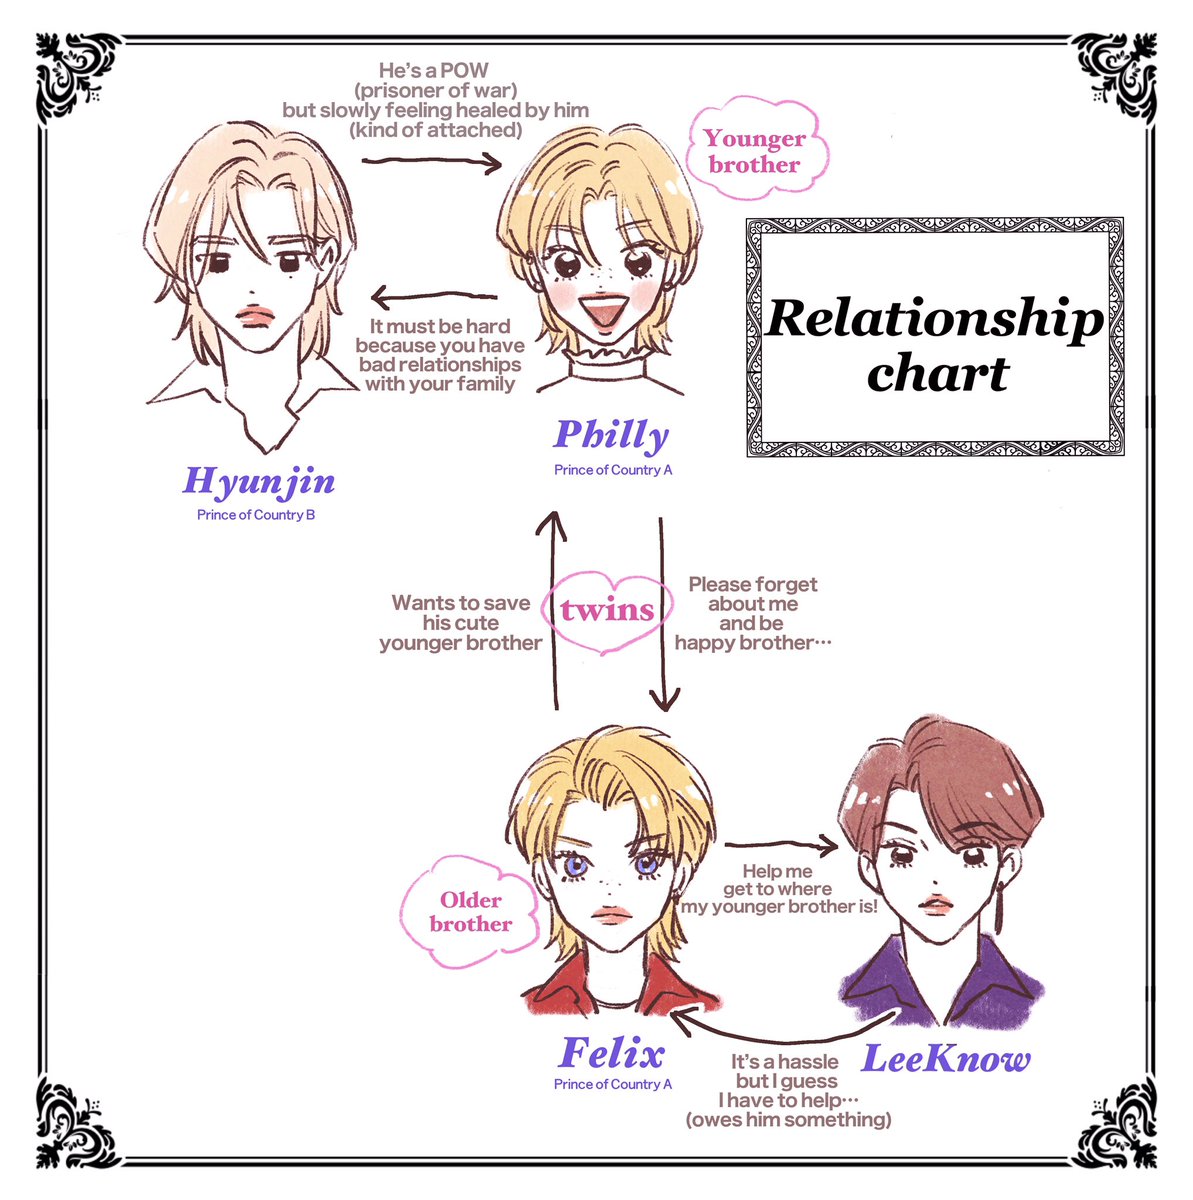 Relationship chart

💖Translated by anna @FelixsLeftPinky 